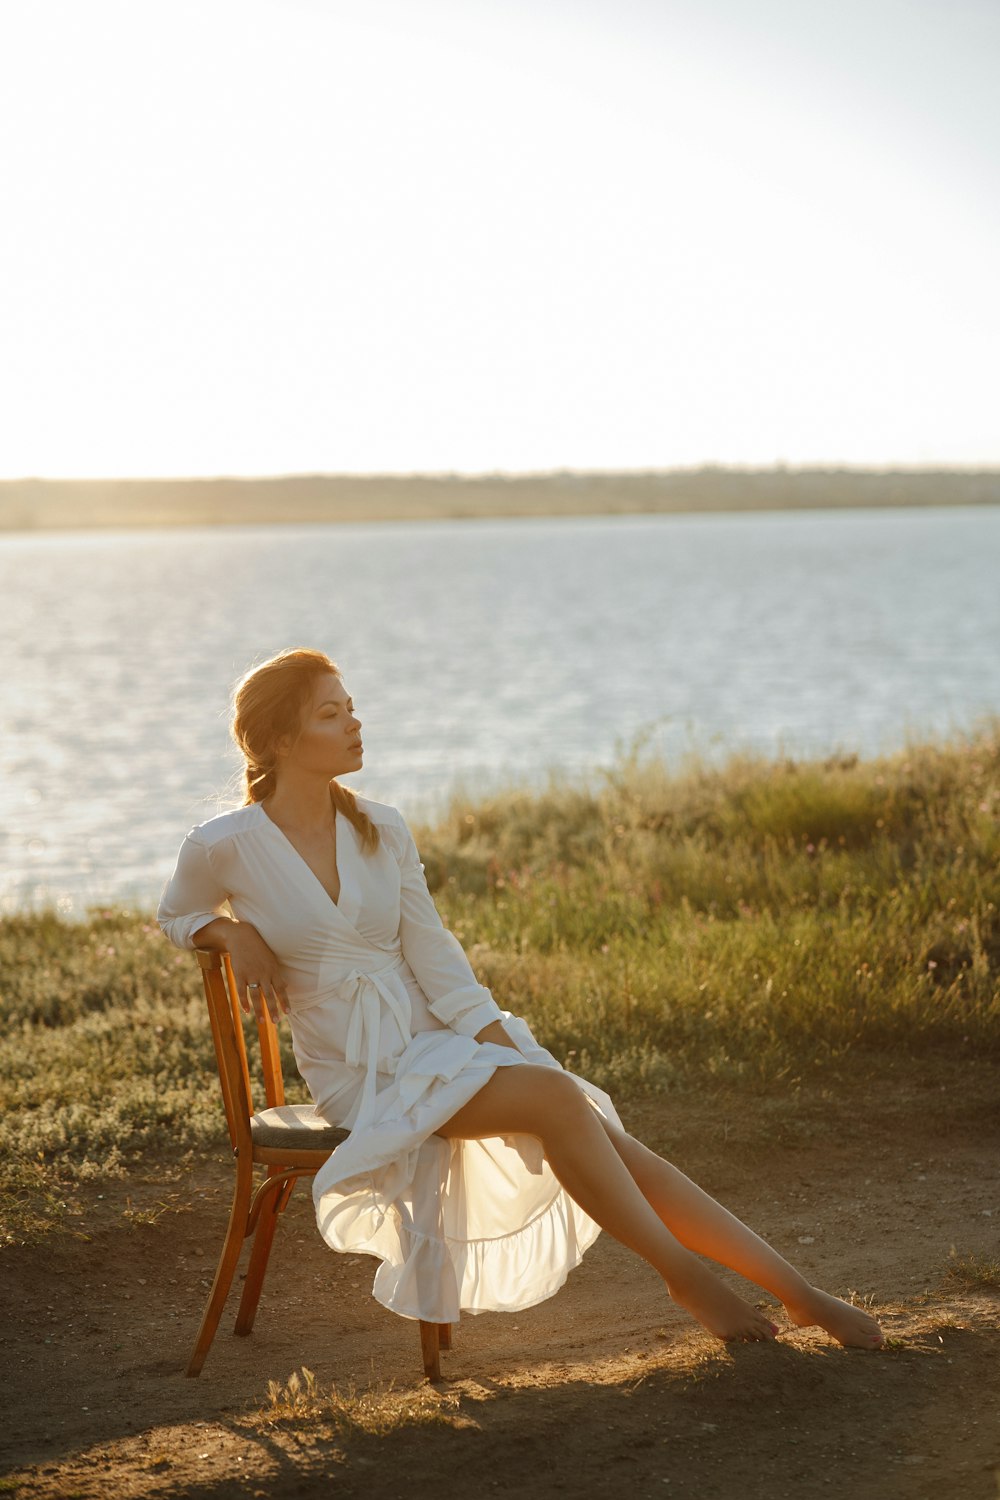 a woman in a white dress sitting on a wooden chair